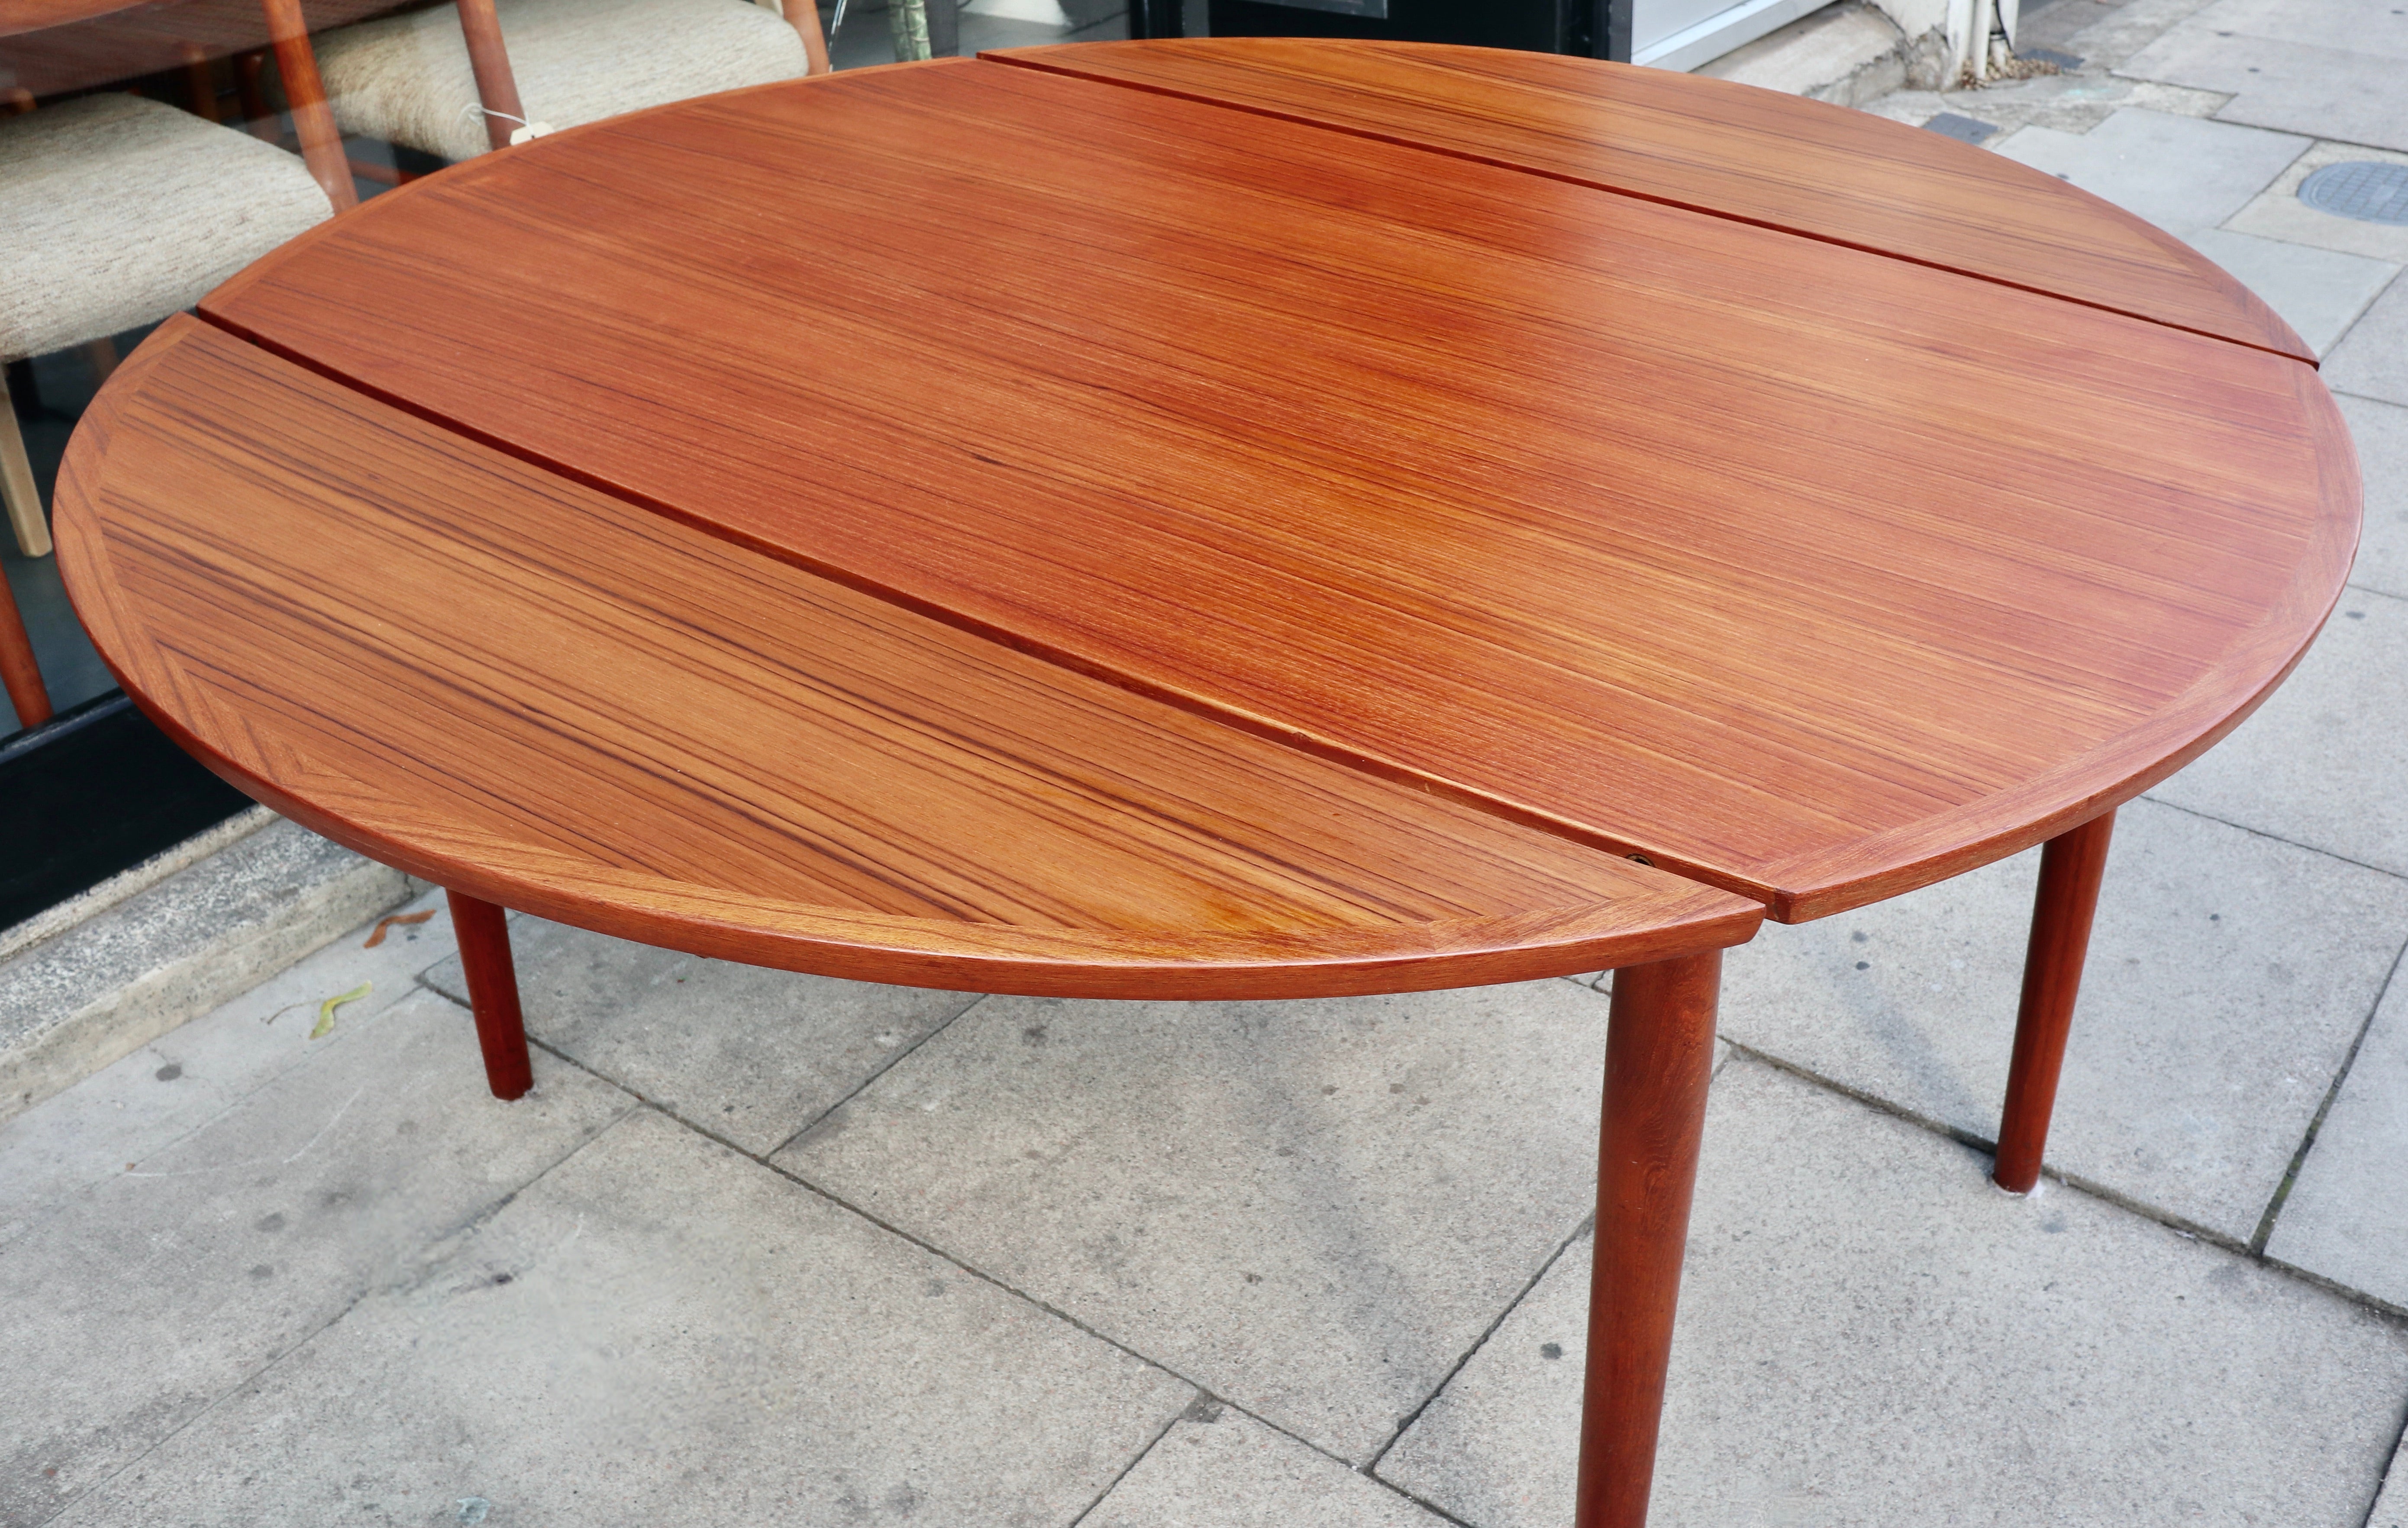 An interesting, unusual and unique 1960s extendable Teak veneered Danish round dining table, designed manufactured by unknown parties.  This table sits on four tapered solid Teak legs, and when unextended, measures 152cm x 85cm, and when fully